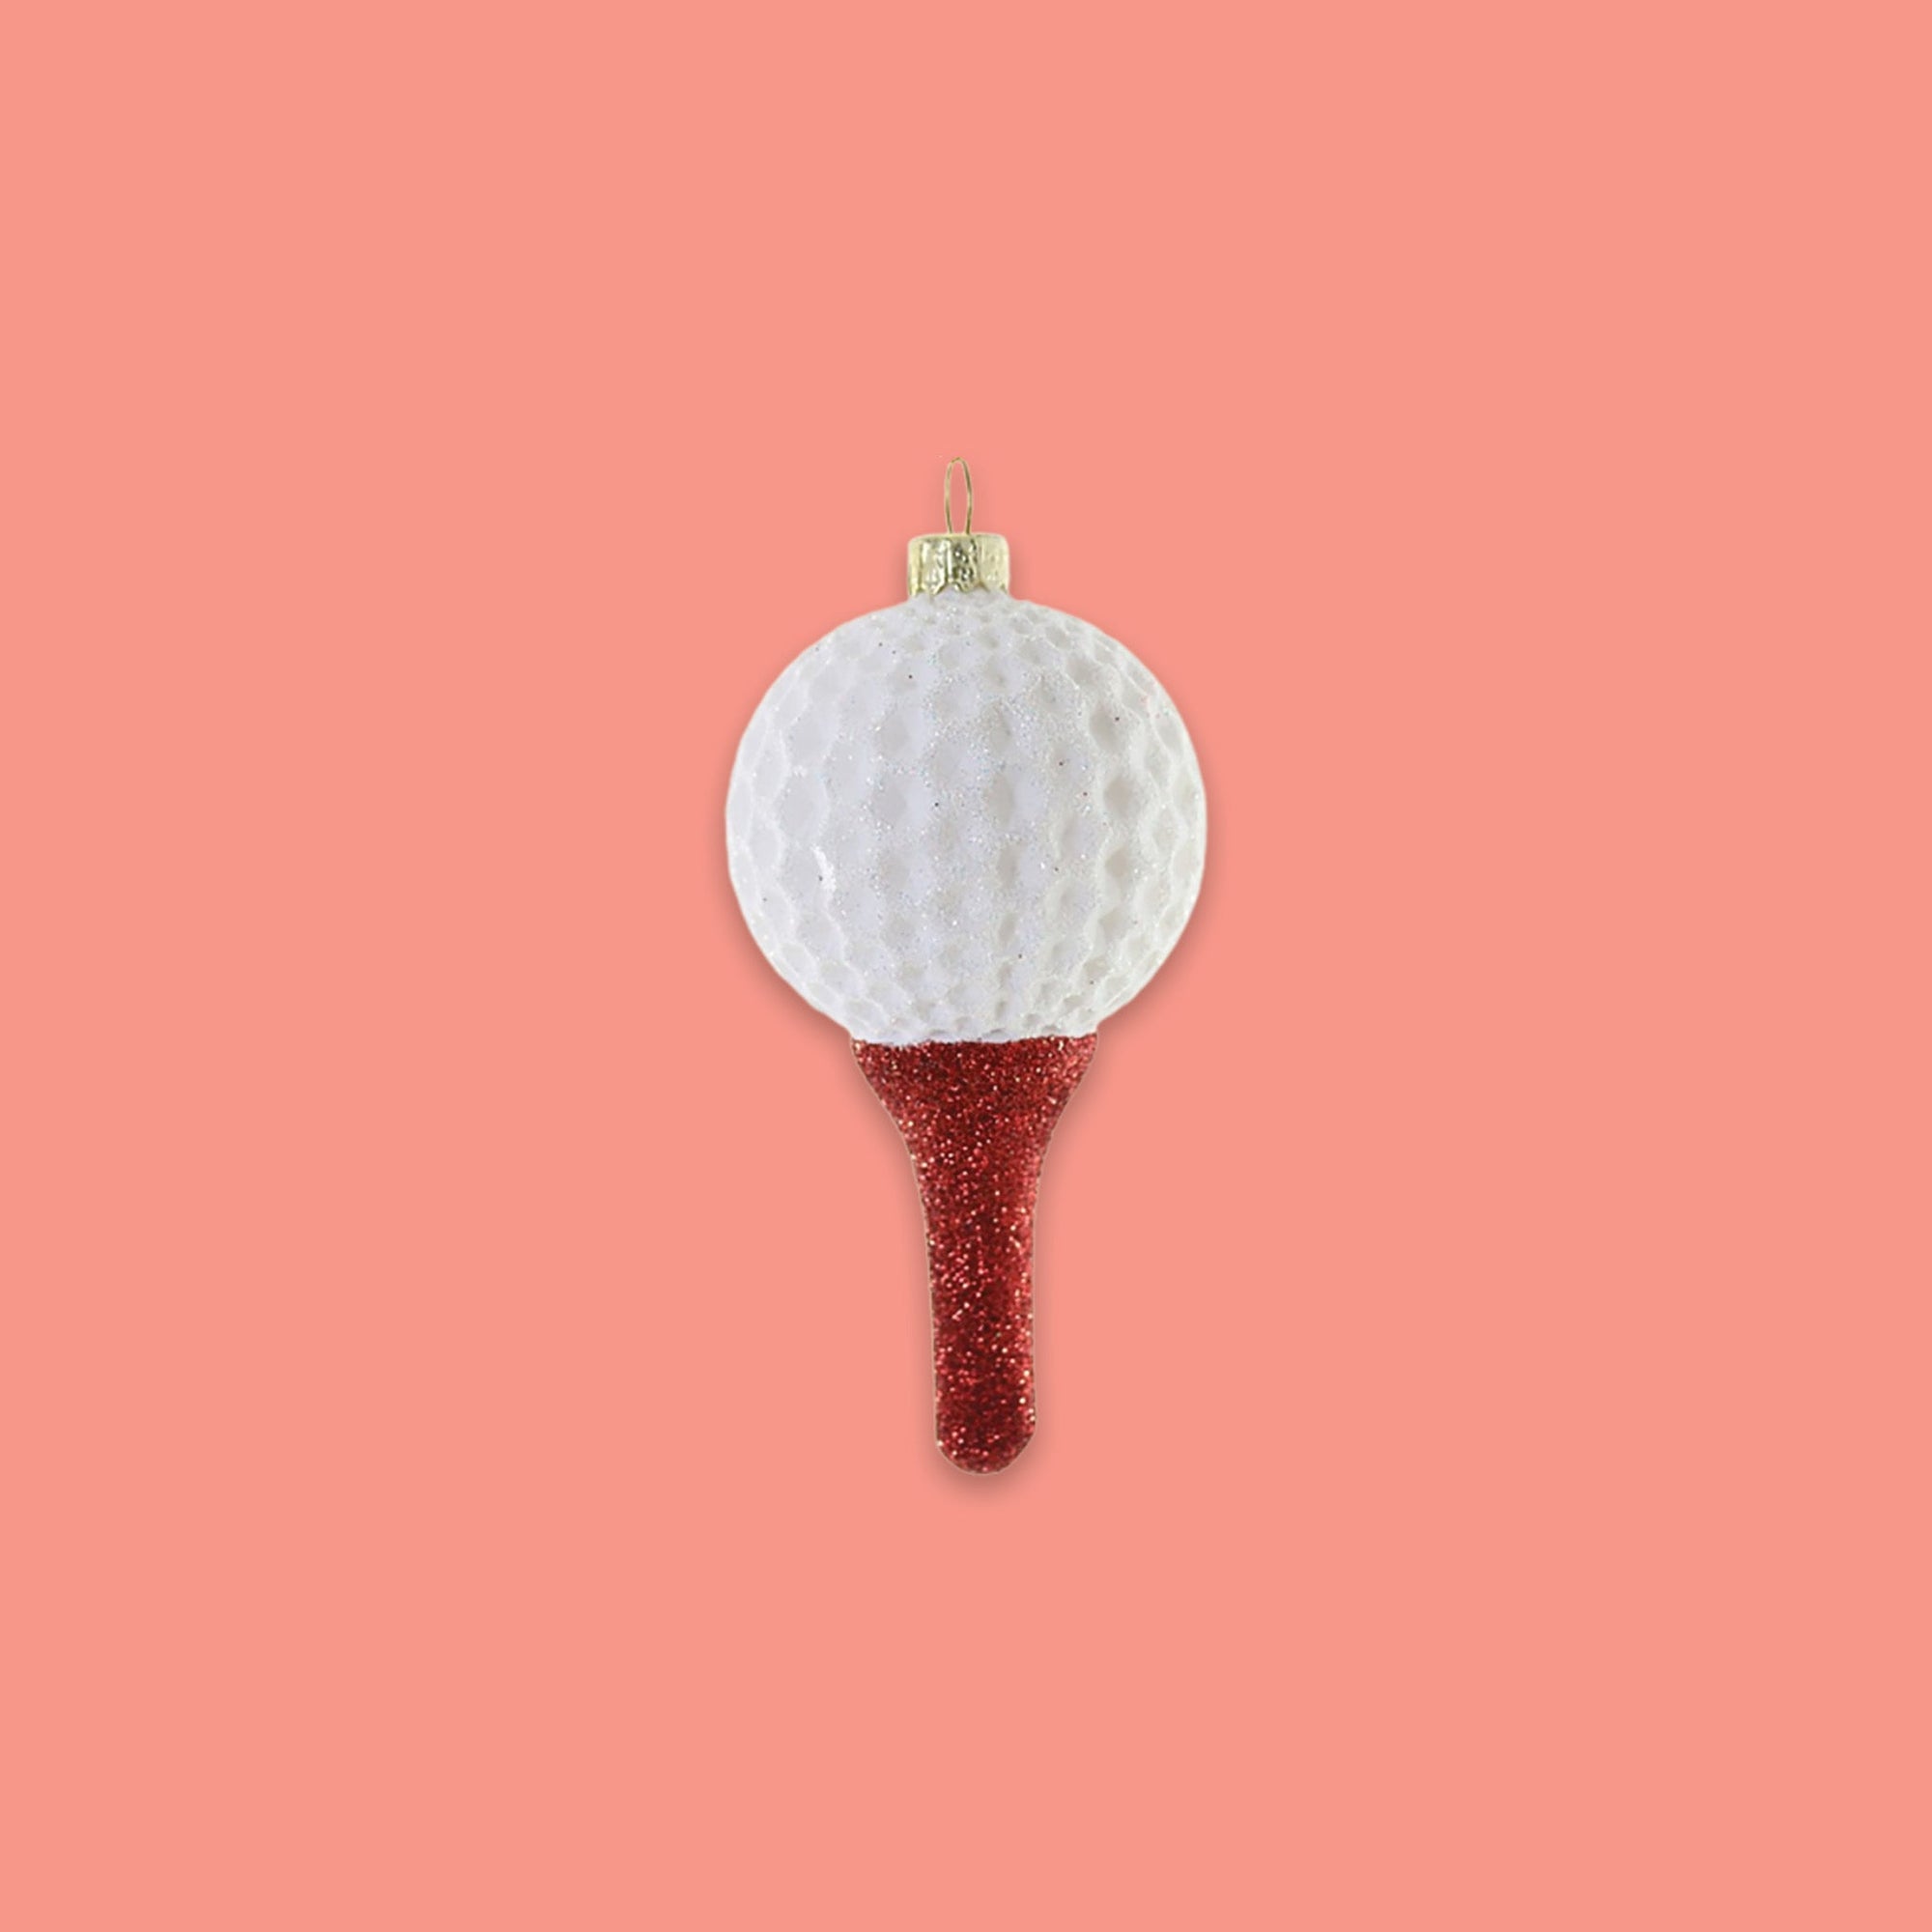 On a coral pink background sits an ornament. This is a white glitter golf ball sitting on top of a red glitter tee.